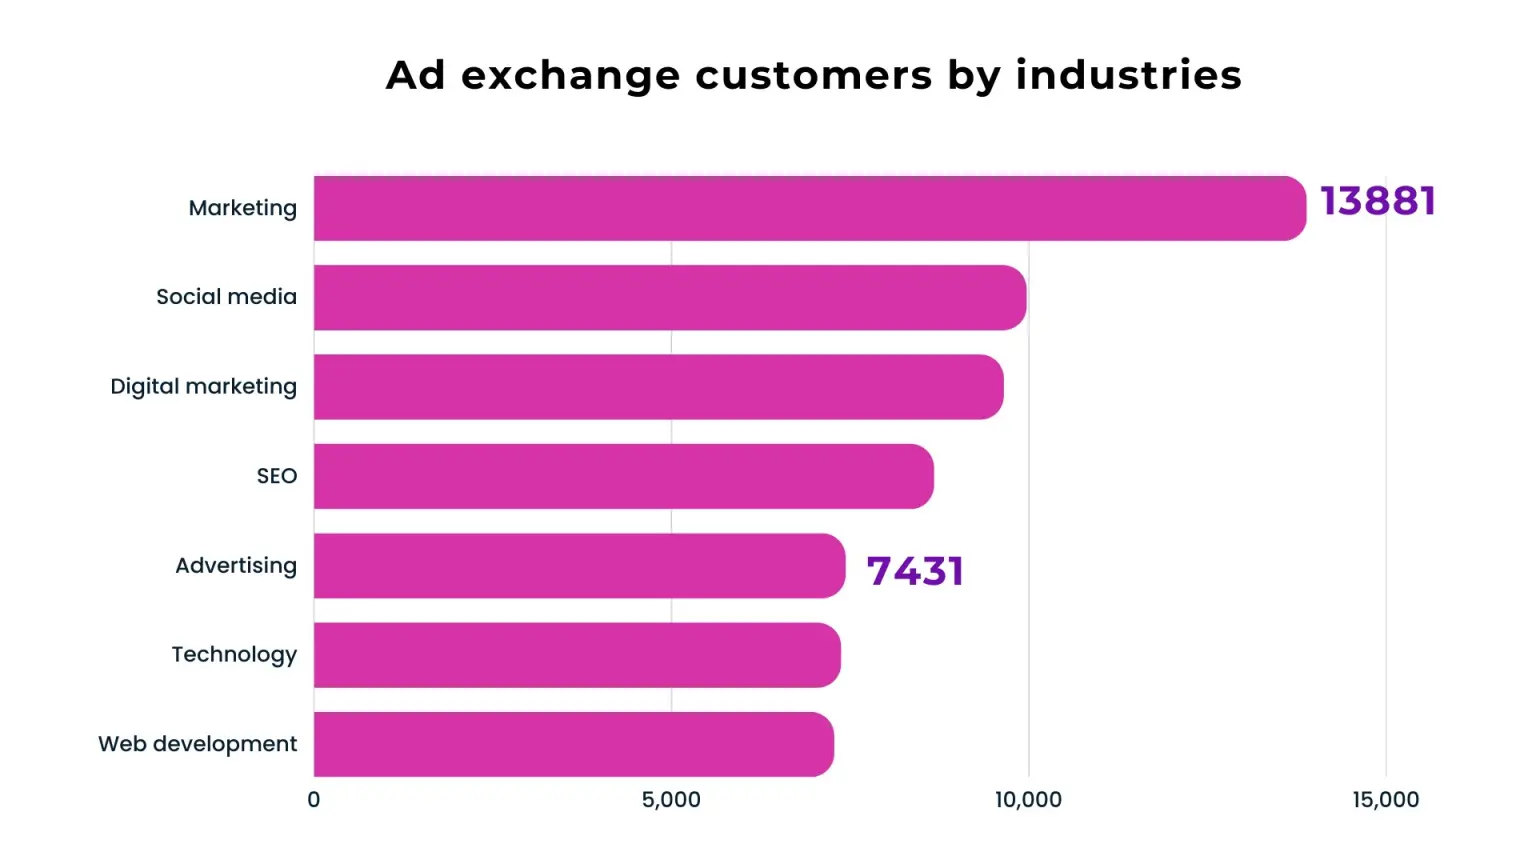 Ad exchange customers by industries